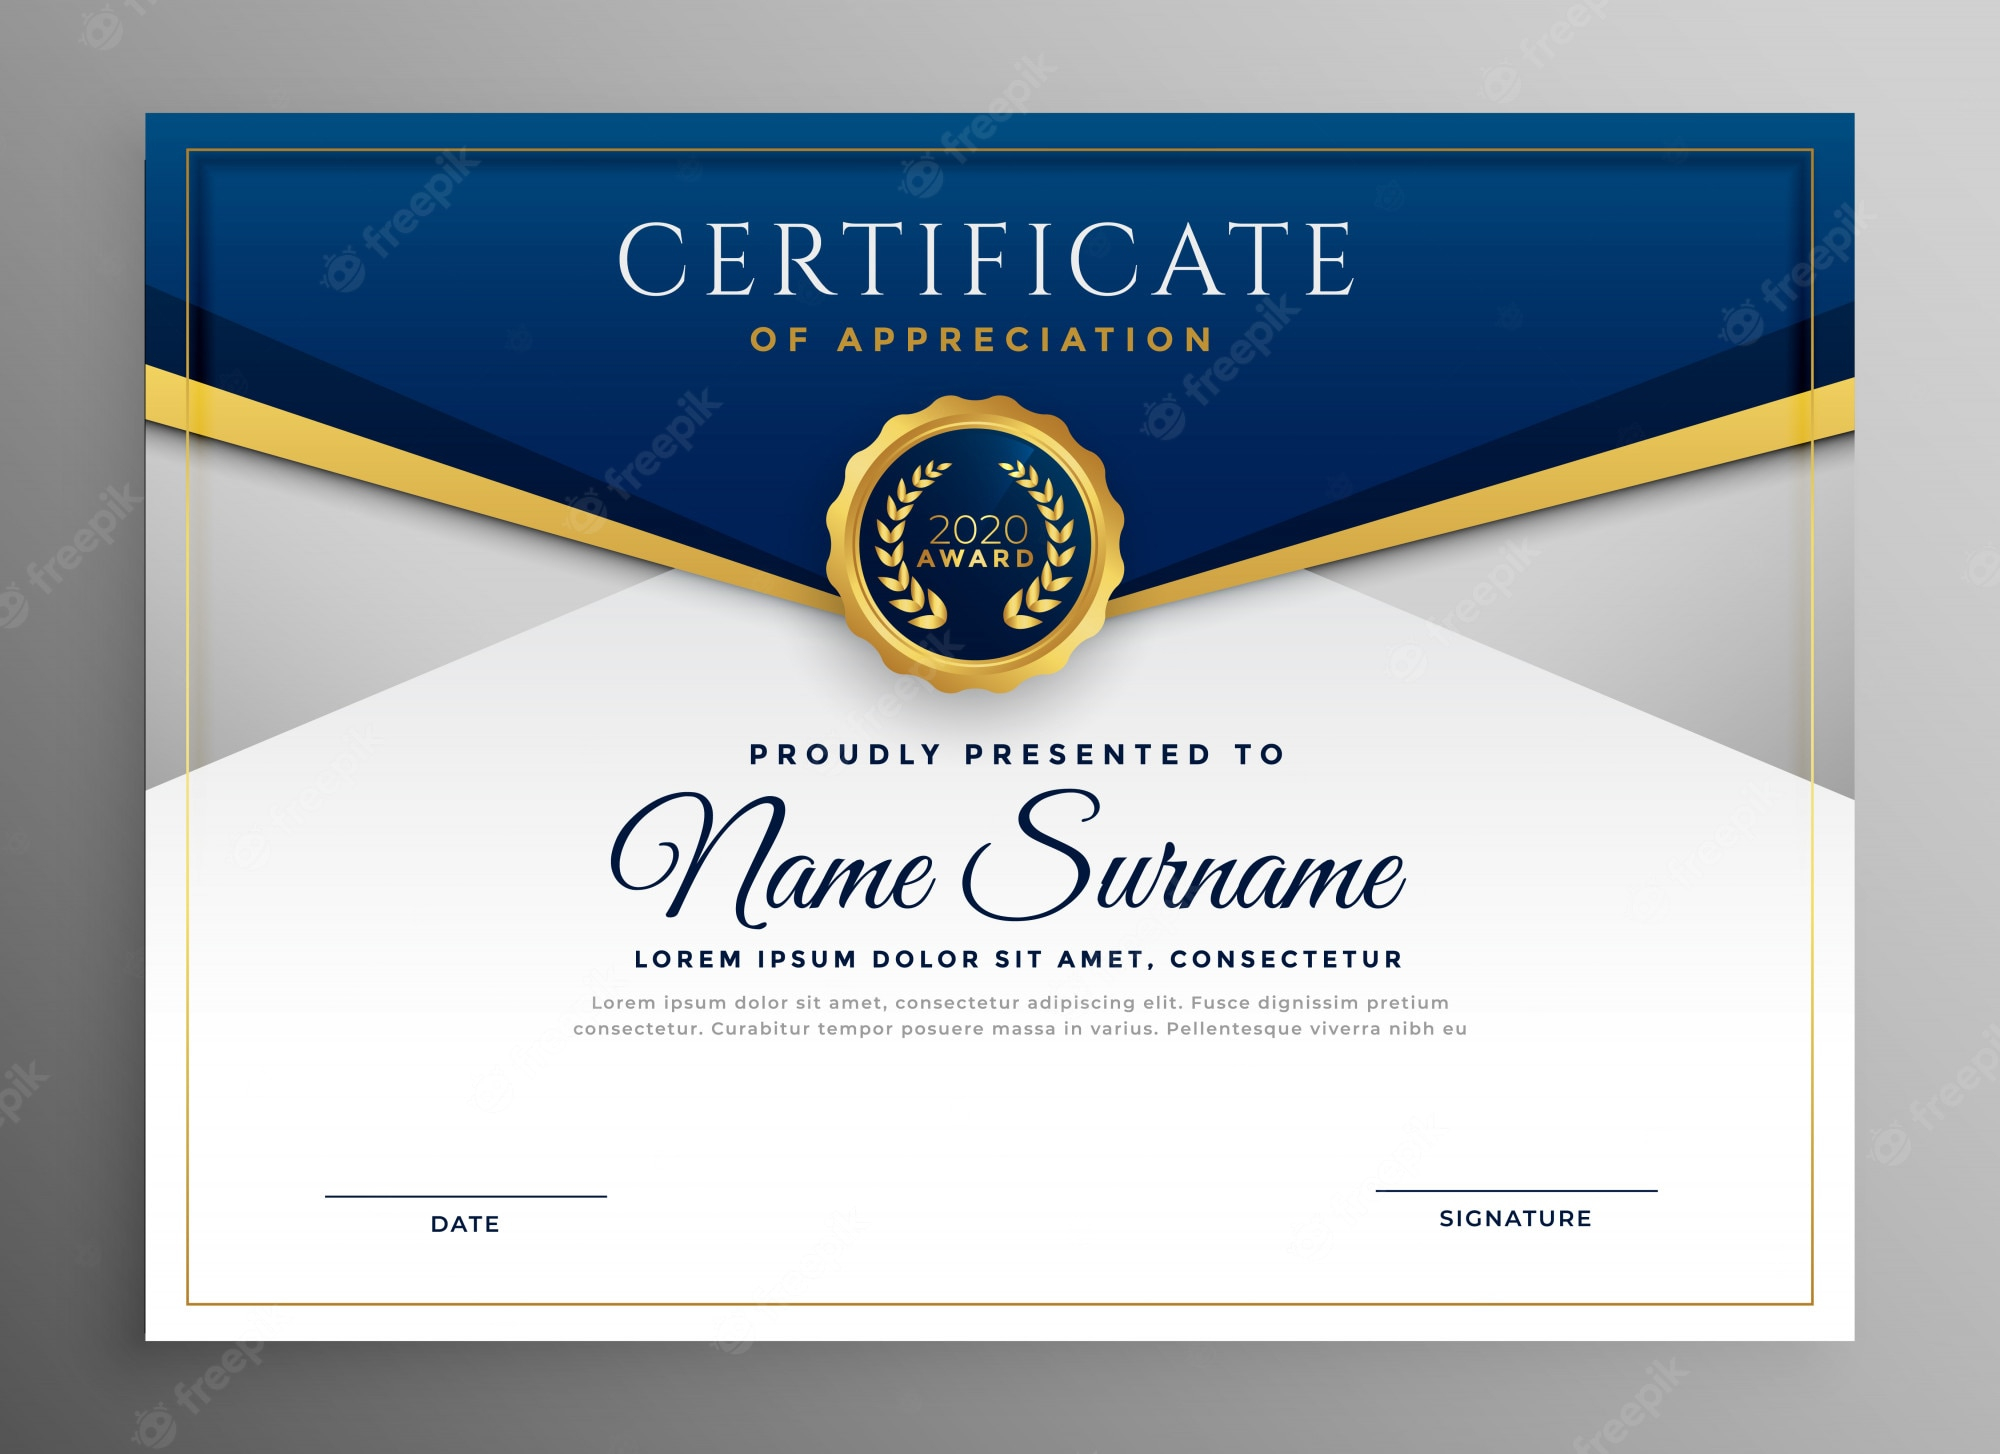 Certificate Images – Free Download On Freepik With Award Certificate Design Template